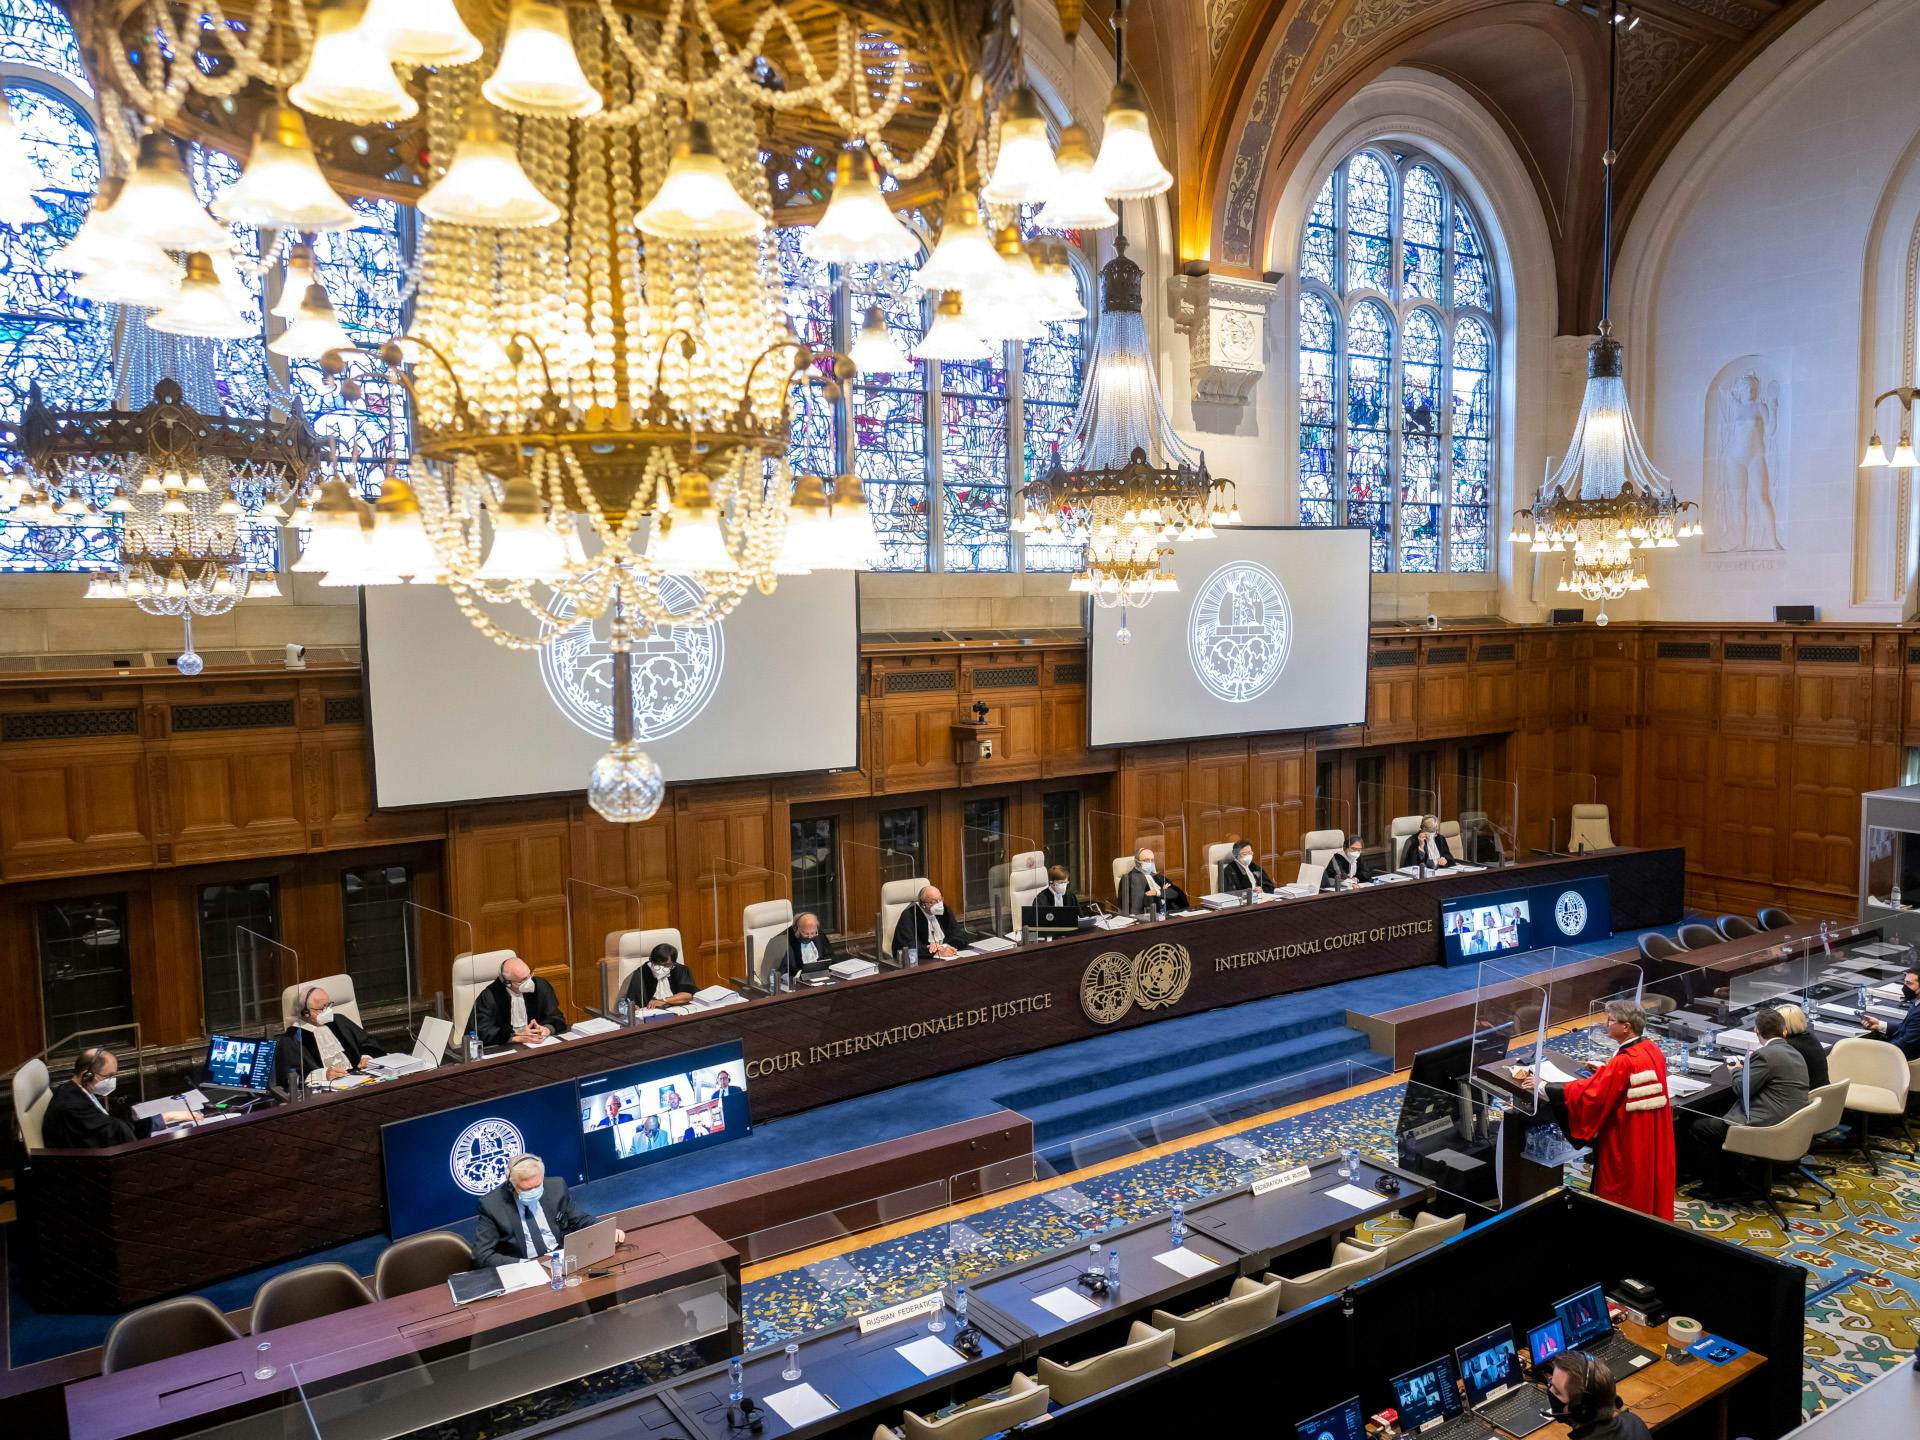 The court room of the International Court of Justice.